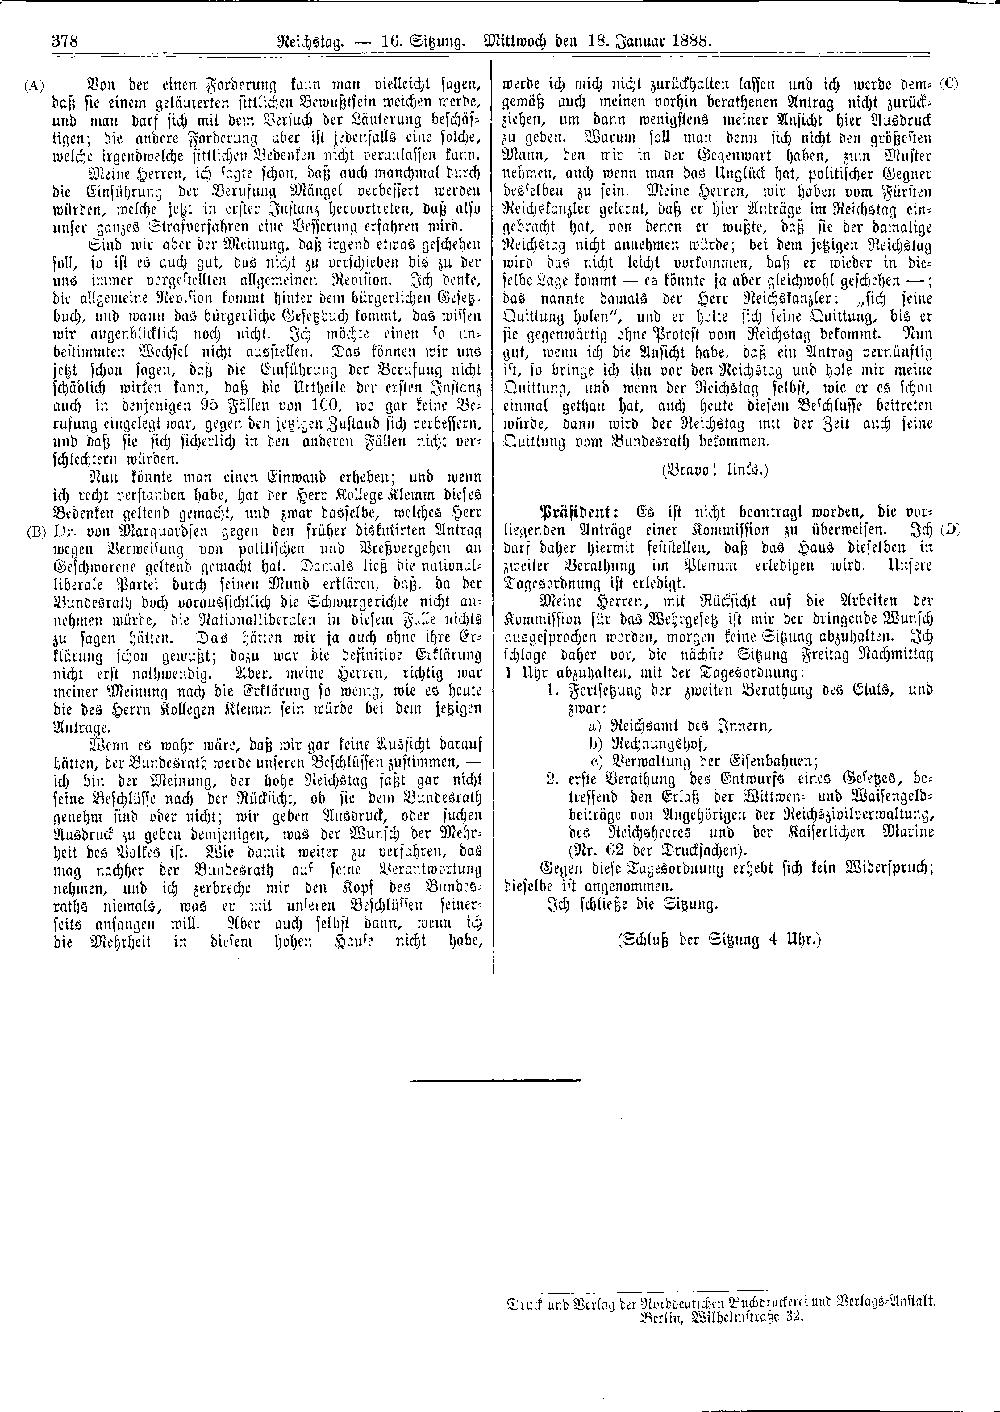 Scan of page 378